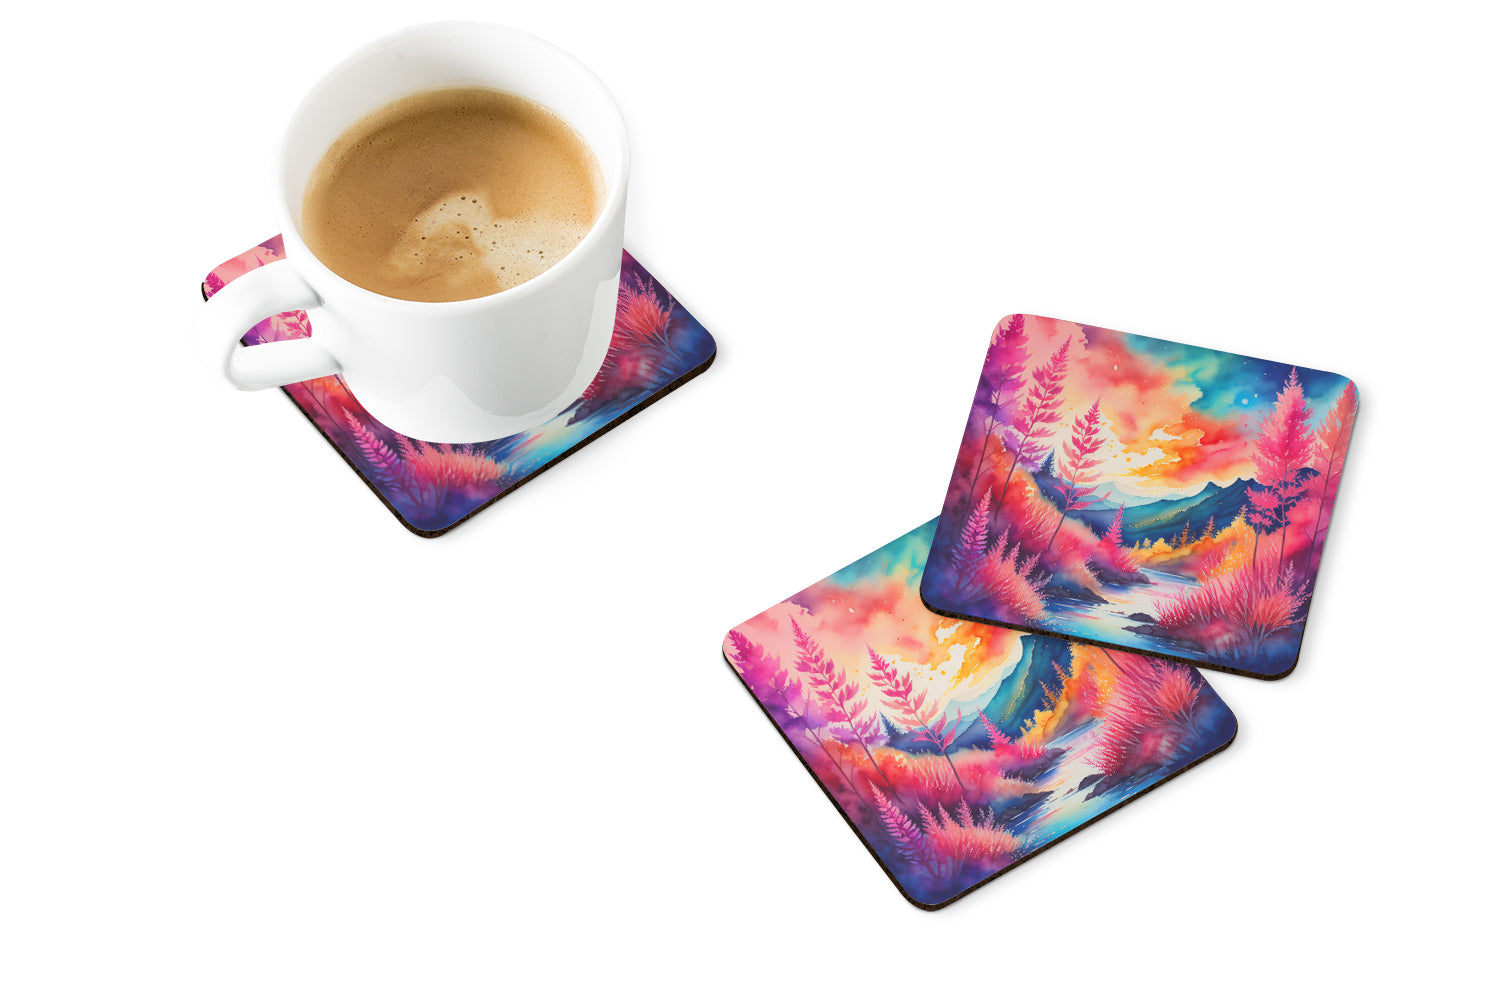 Buy this Colorful Astilbe Foam Coaster Set of 4